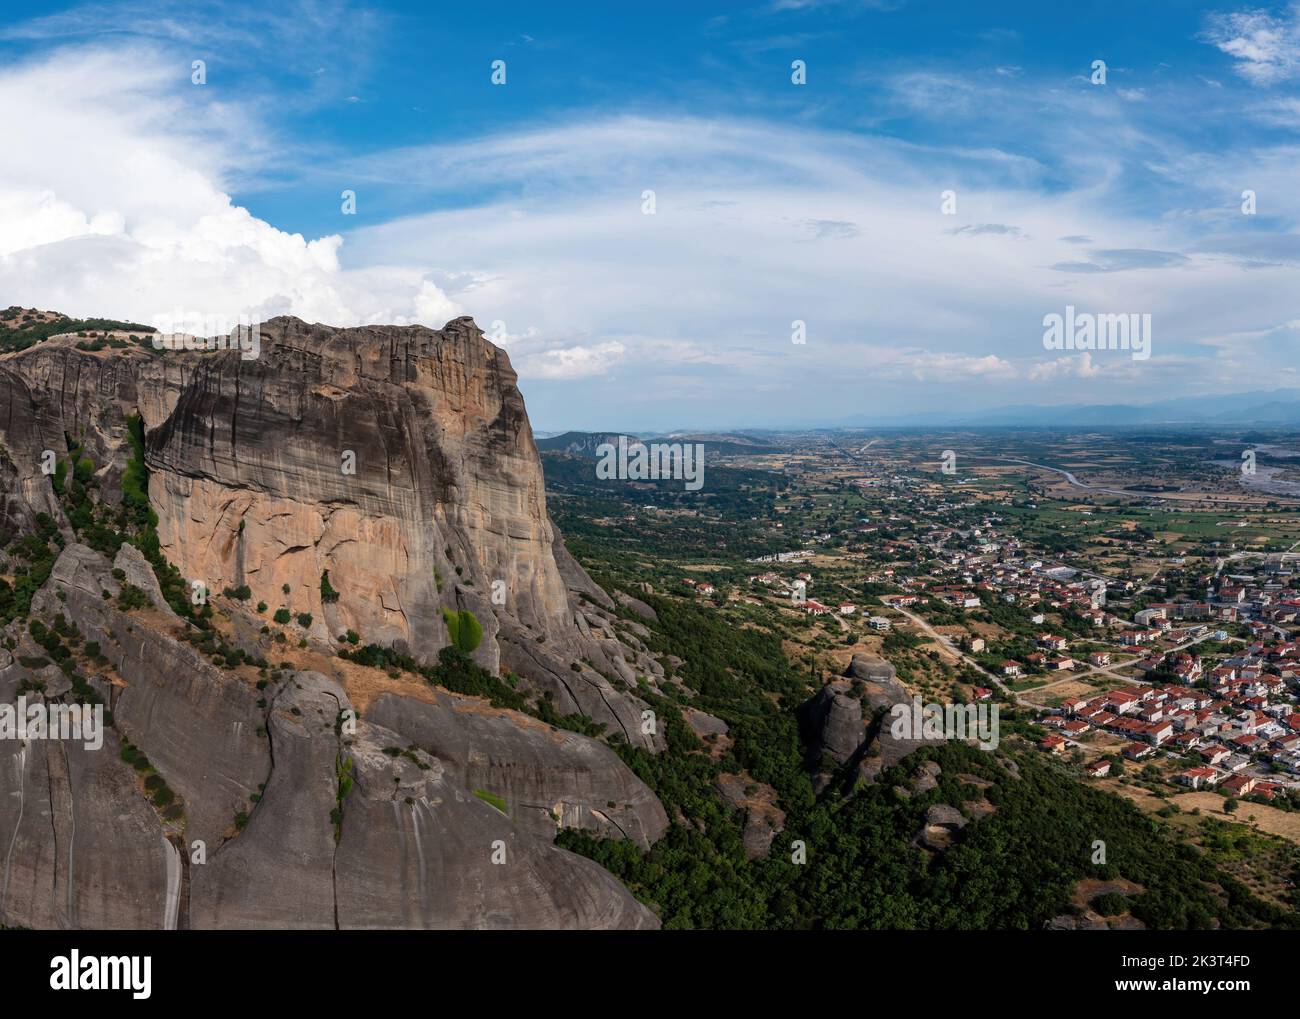 Meteora Greece at sunrise, Blue sky with clouds over Monastery buildings on top of rocks and Kalambaka town and valley. Europe travel destination Stock Photo